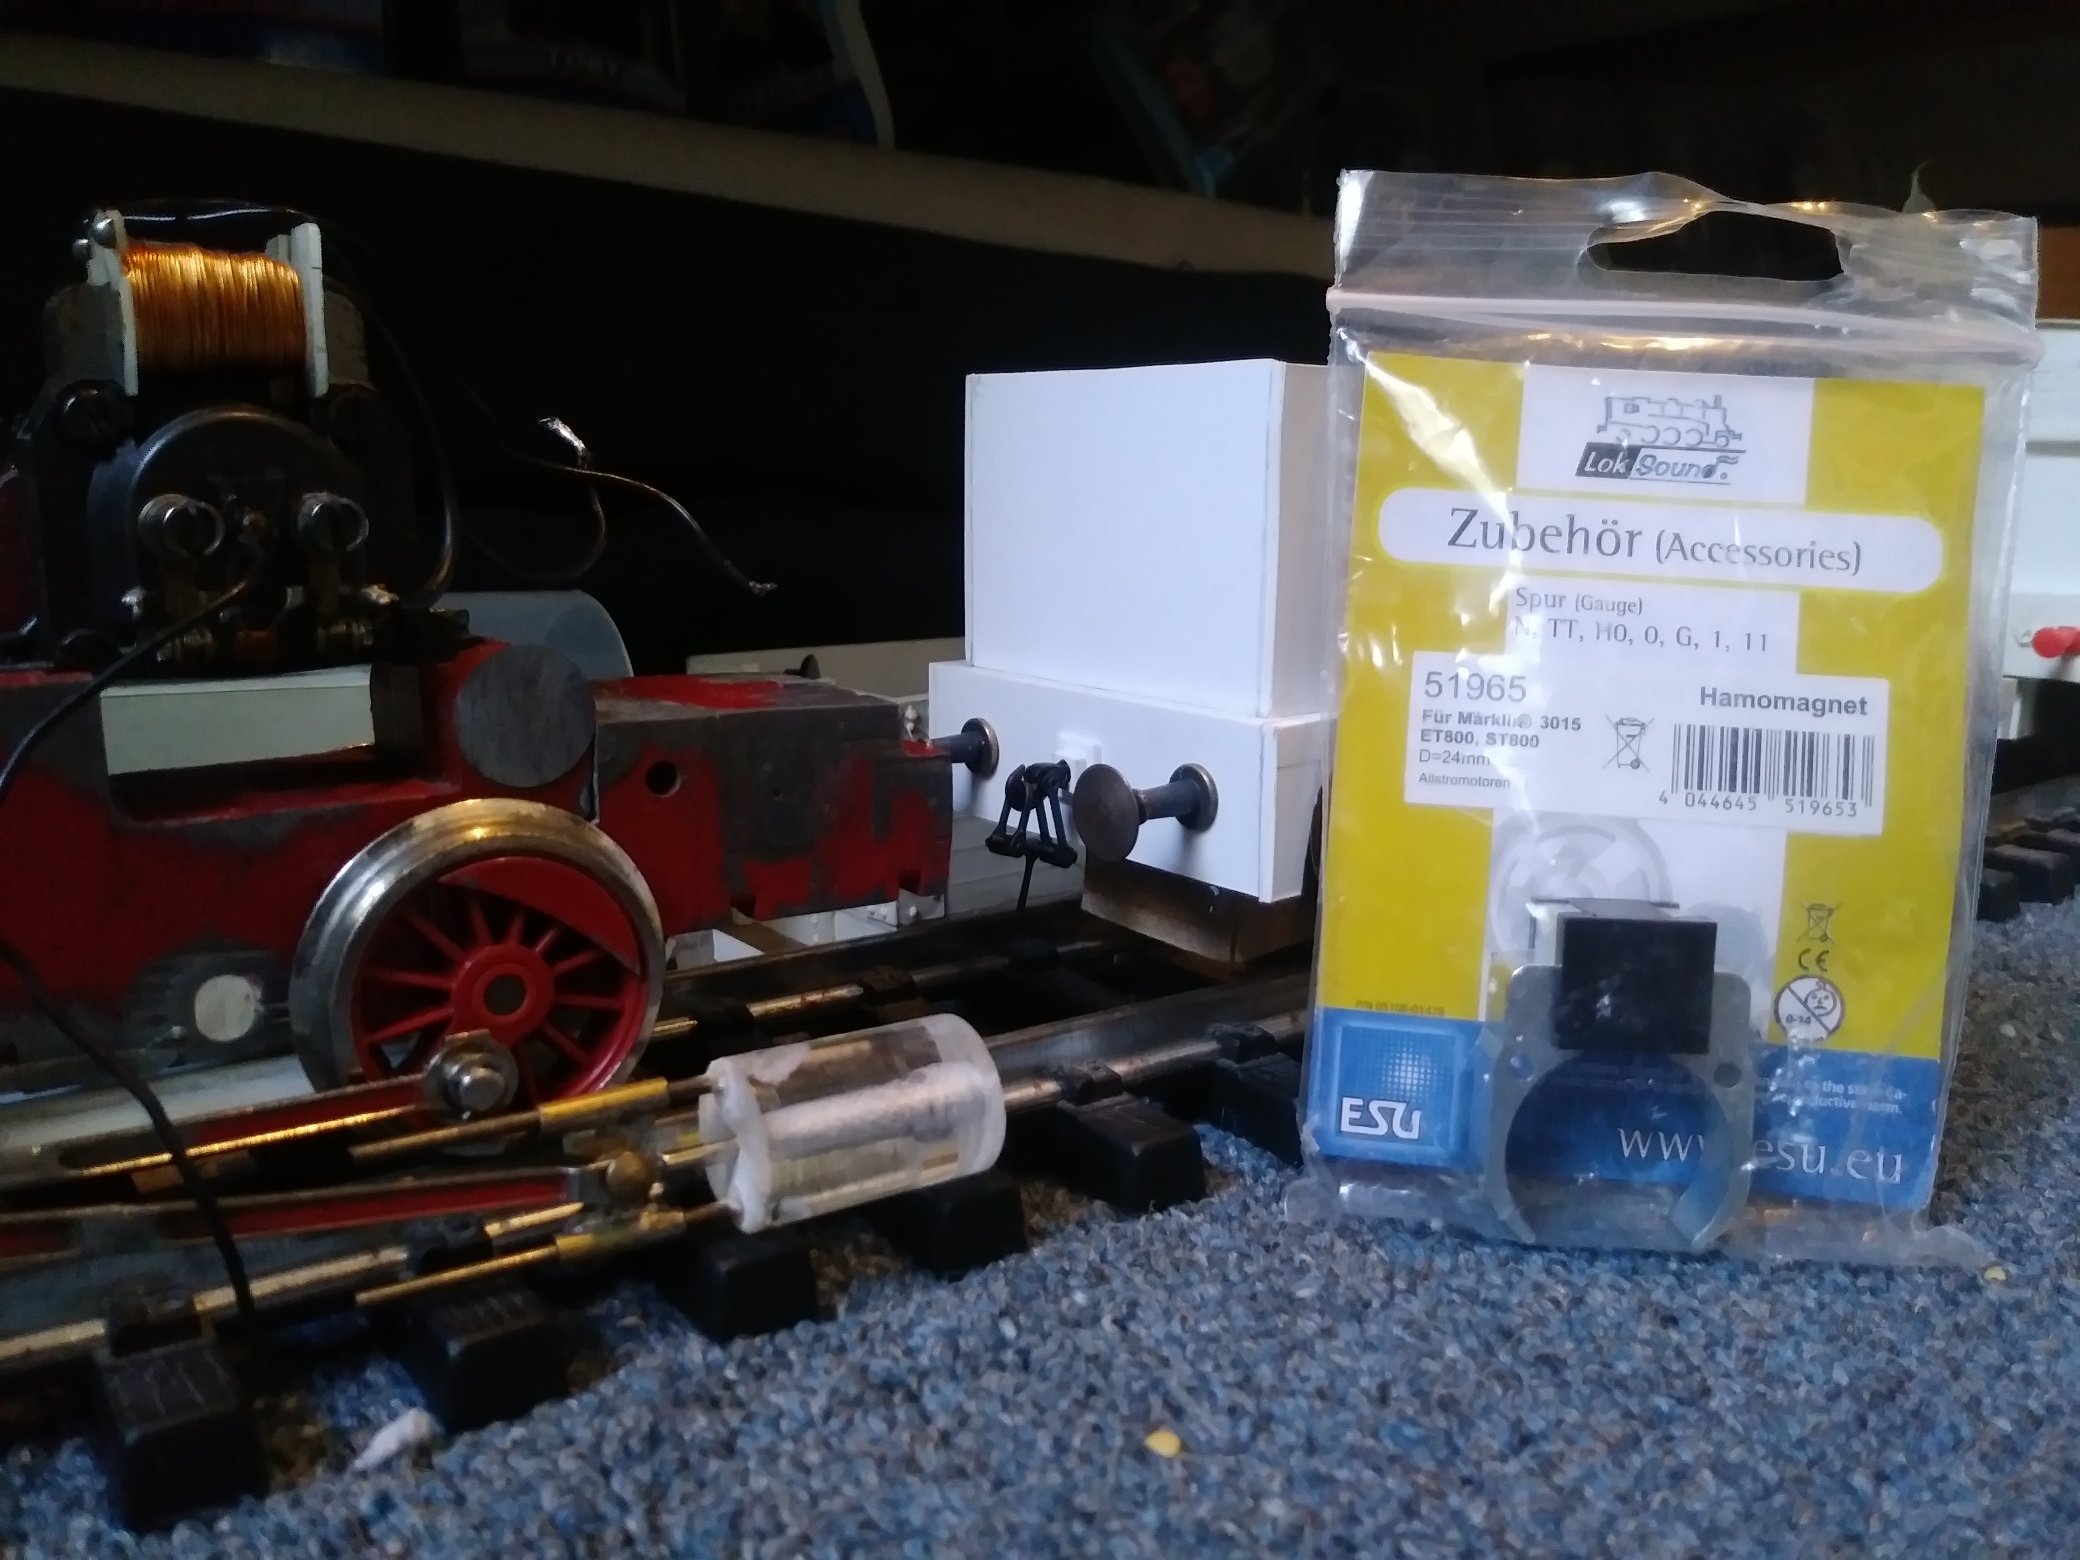 Baglæns ulv privatliv Timothy (Enginefan020) on Twitter: "I just received a new permanent magnet  in the mail today! It is to replace the field winding of the Marklin motor  in order to convert it from